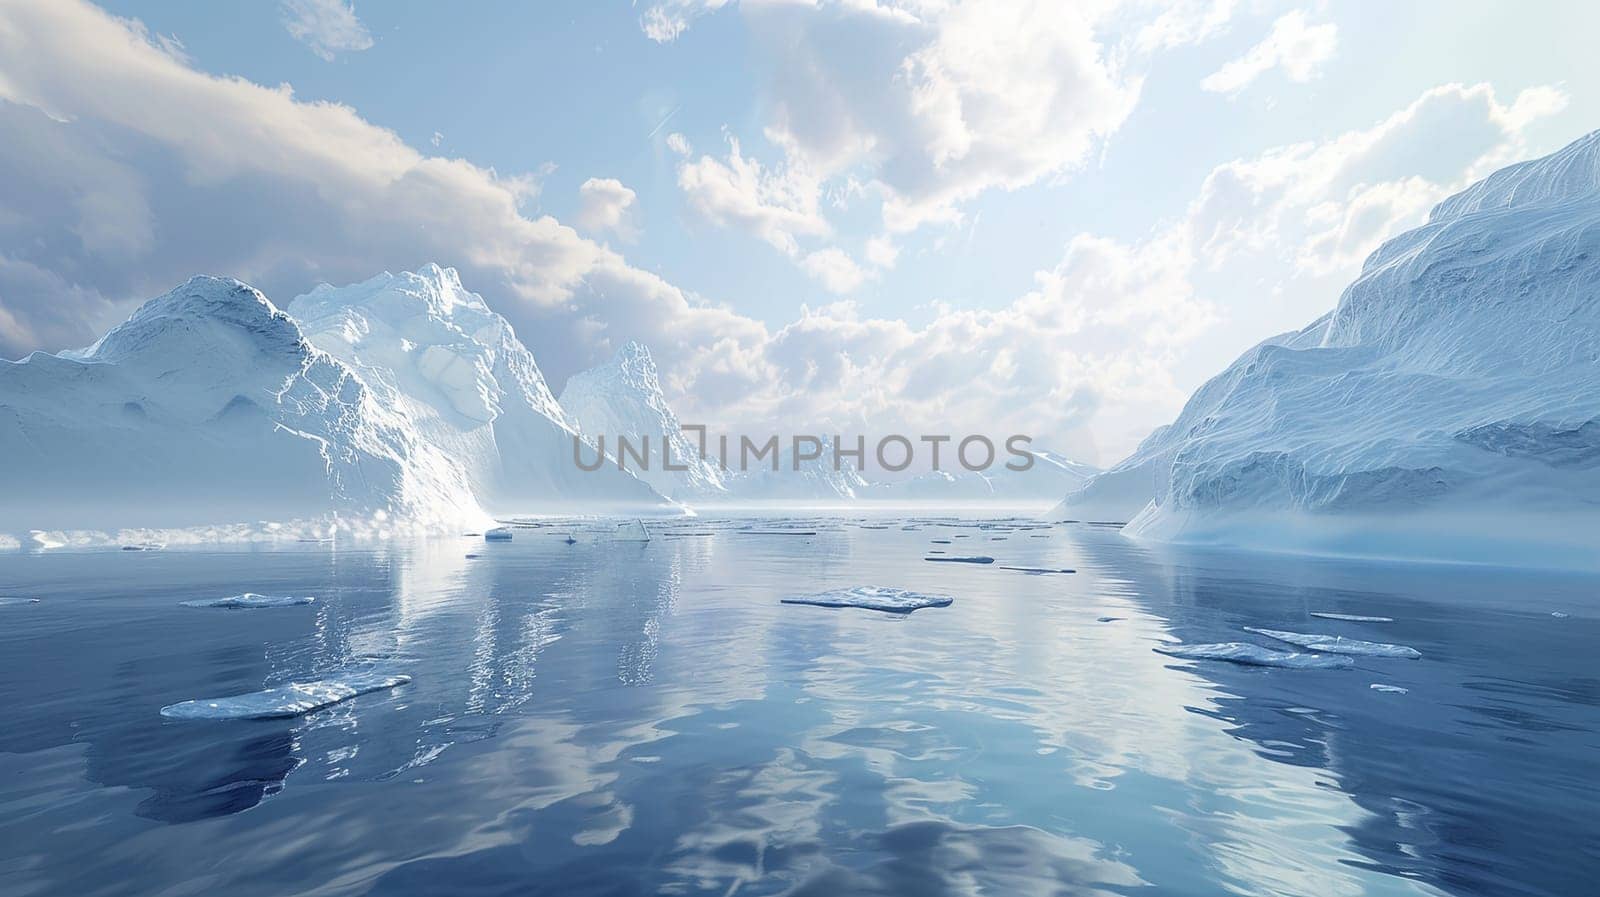 Multiple icebergs float in a body of water, reflecting the light in the cold Arctic environment.